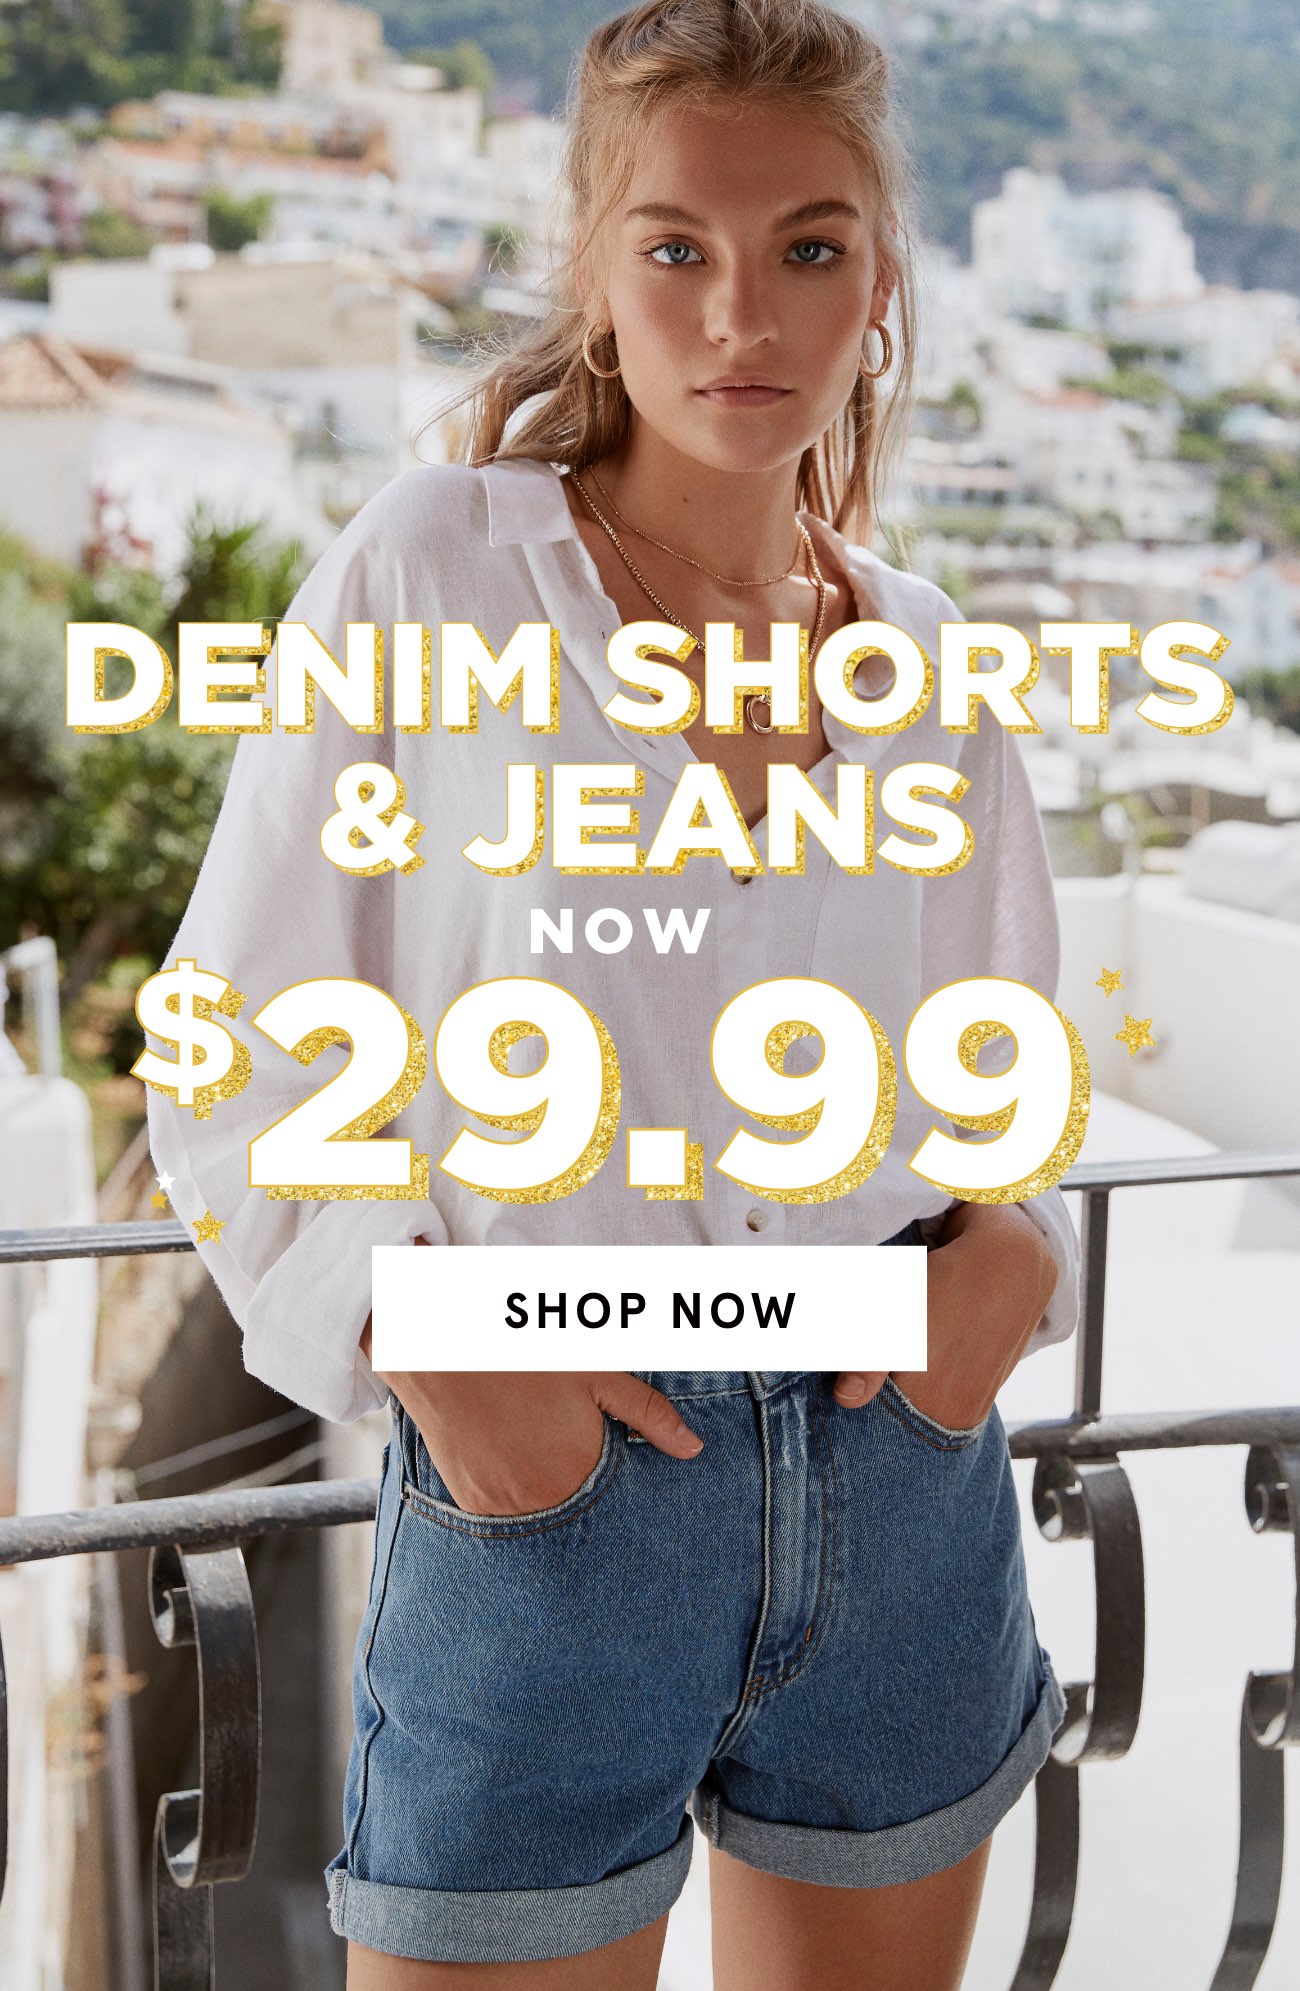 Denim Shorts and Jeans now $29.99